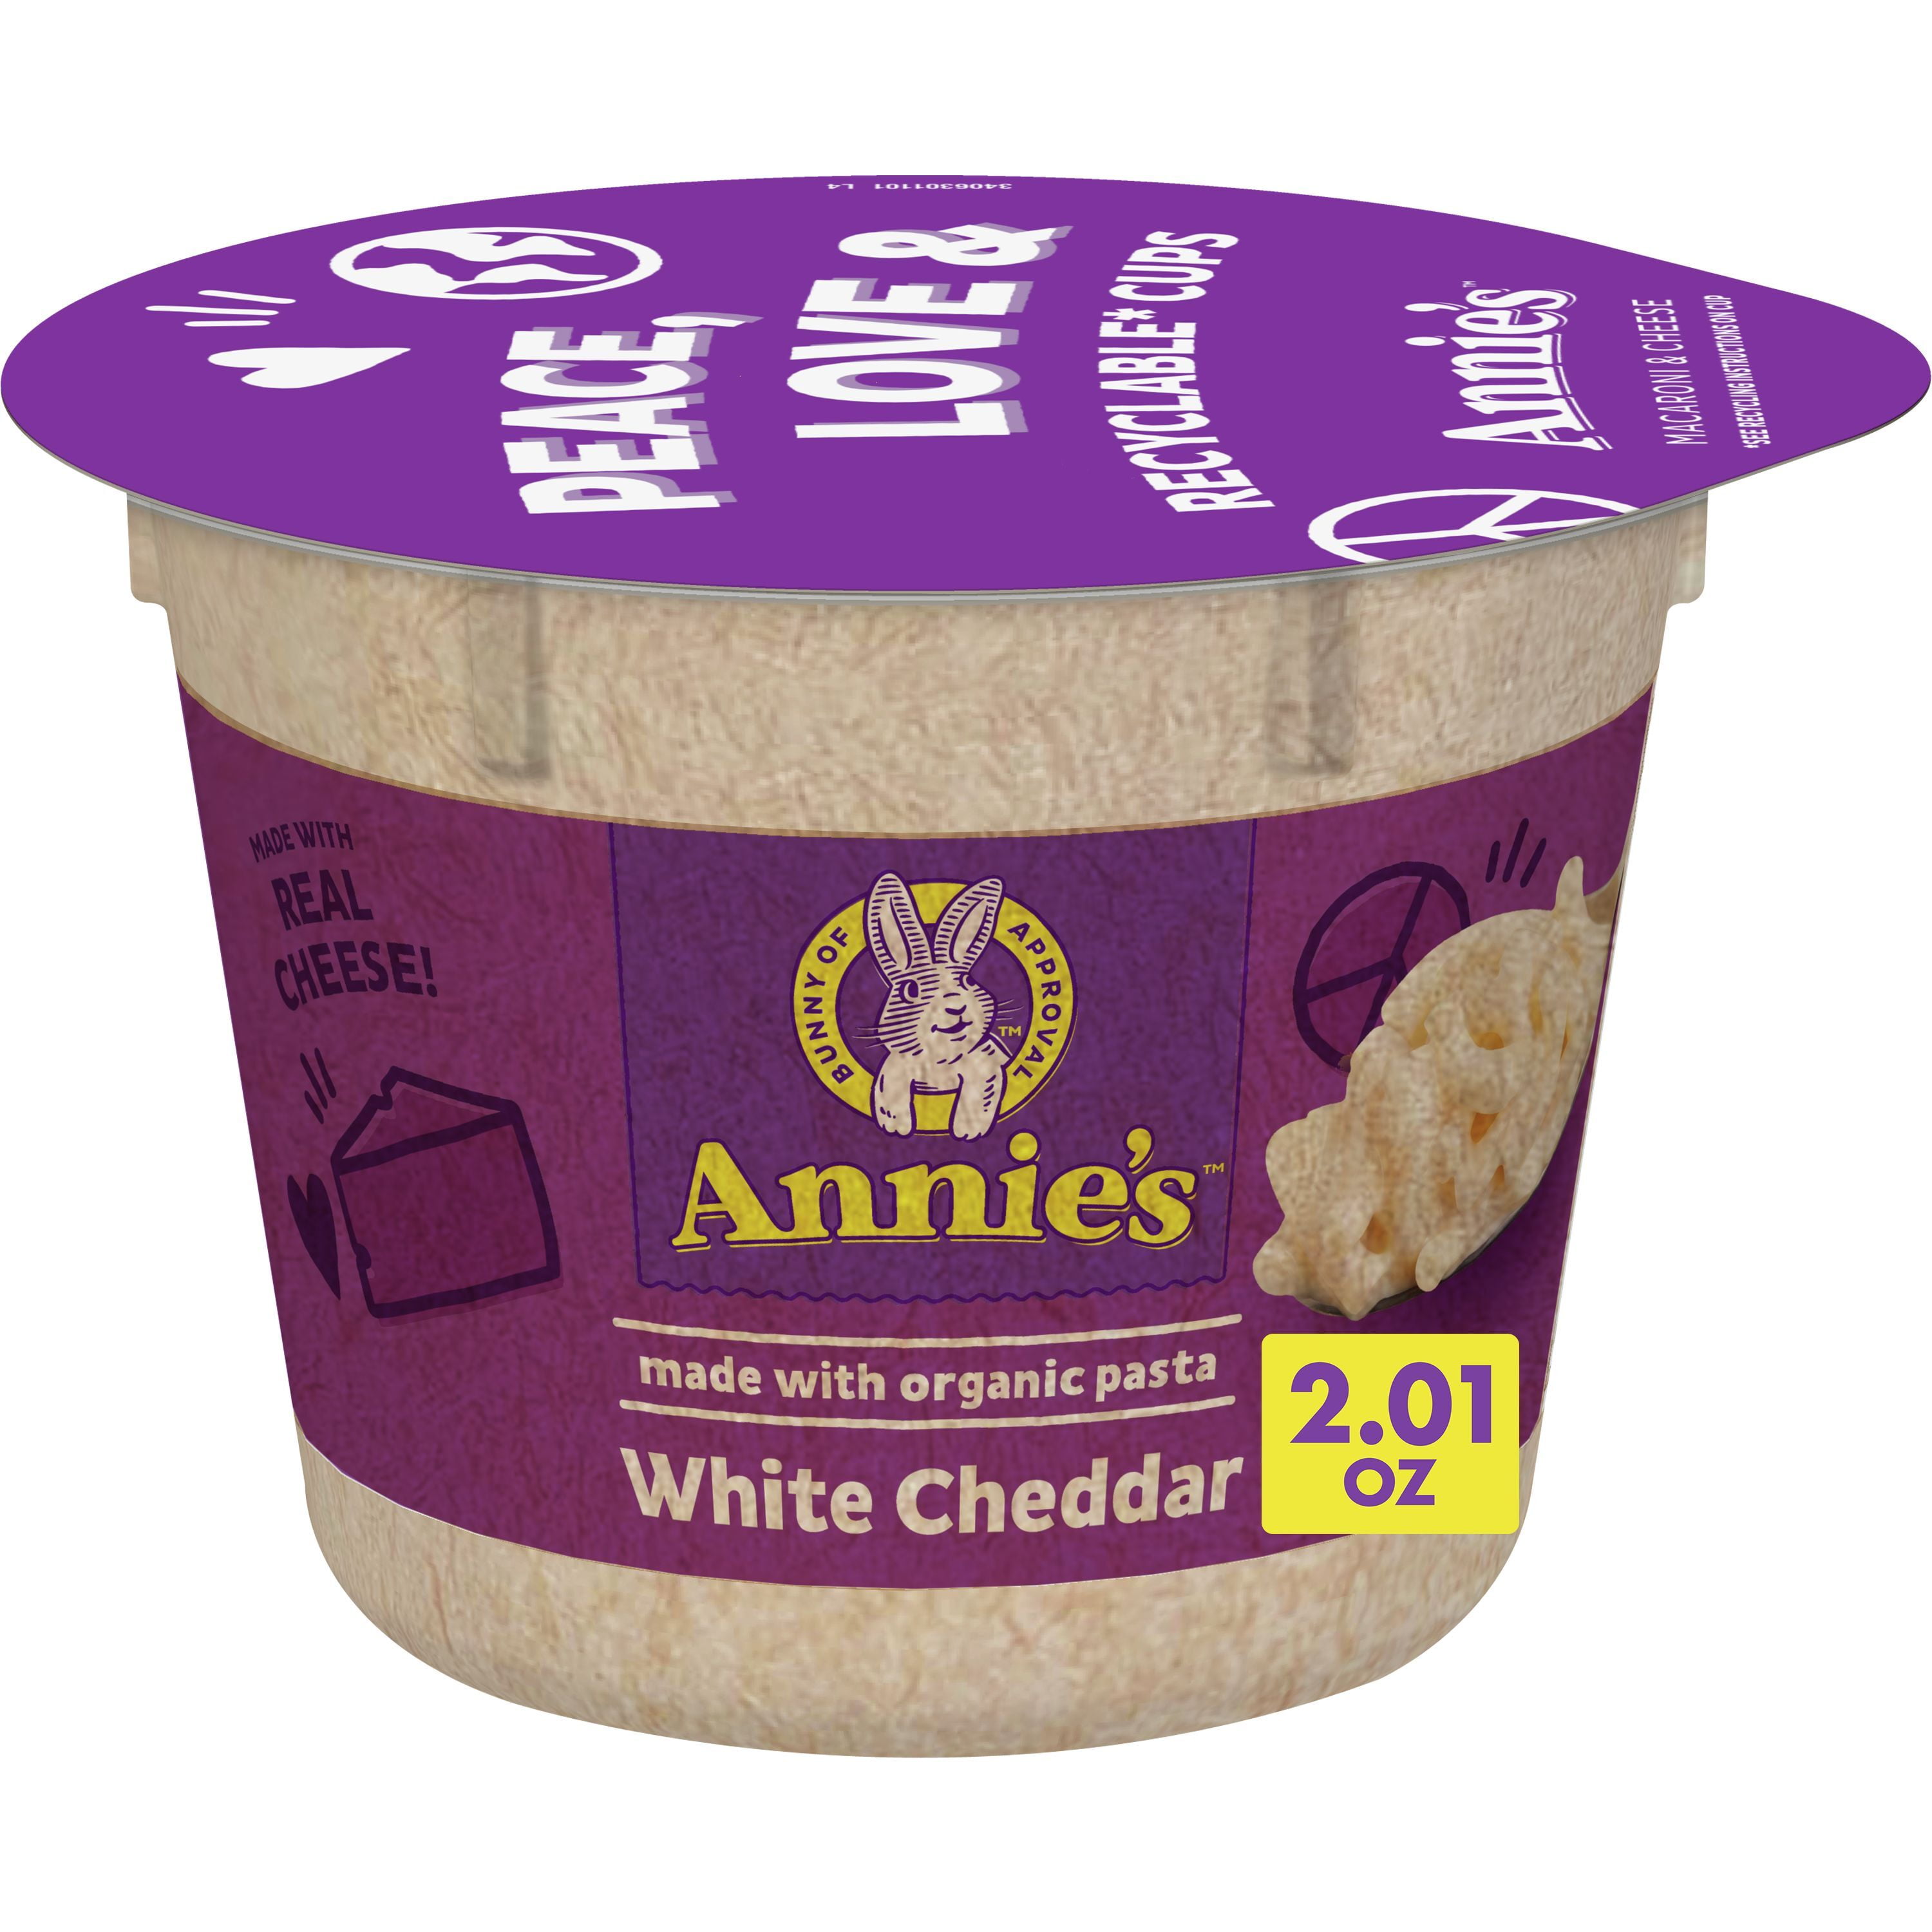 Annie's White Cheddar Macaroni & Cheese, Microwavable Cup, 2.01 oz